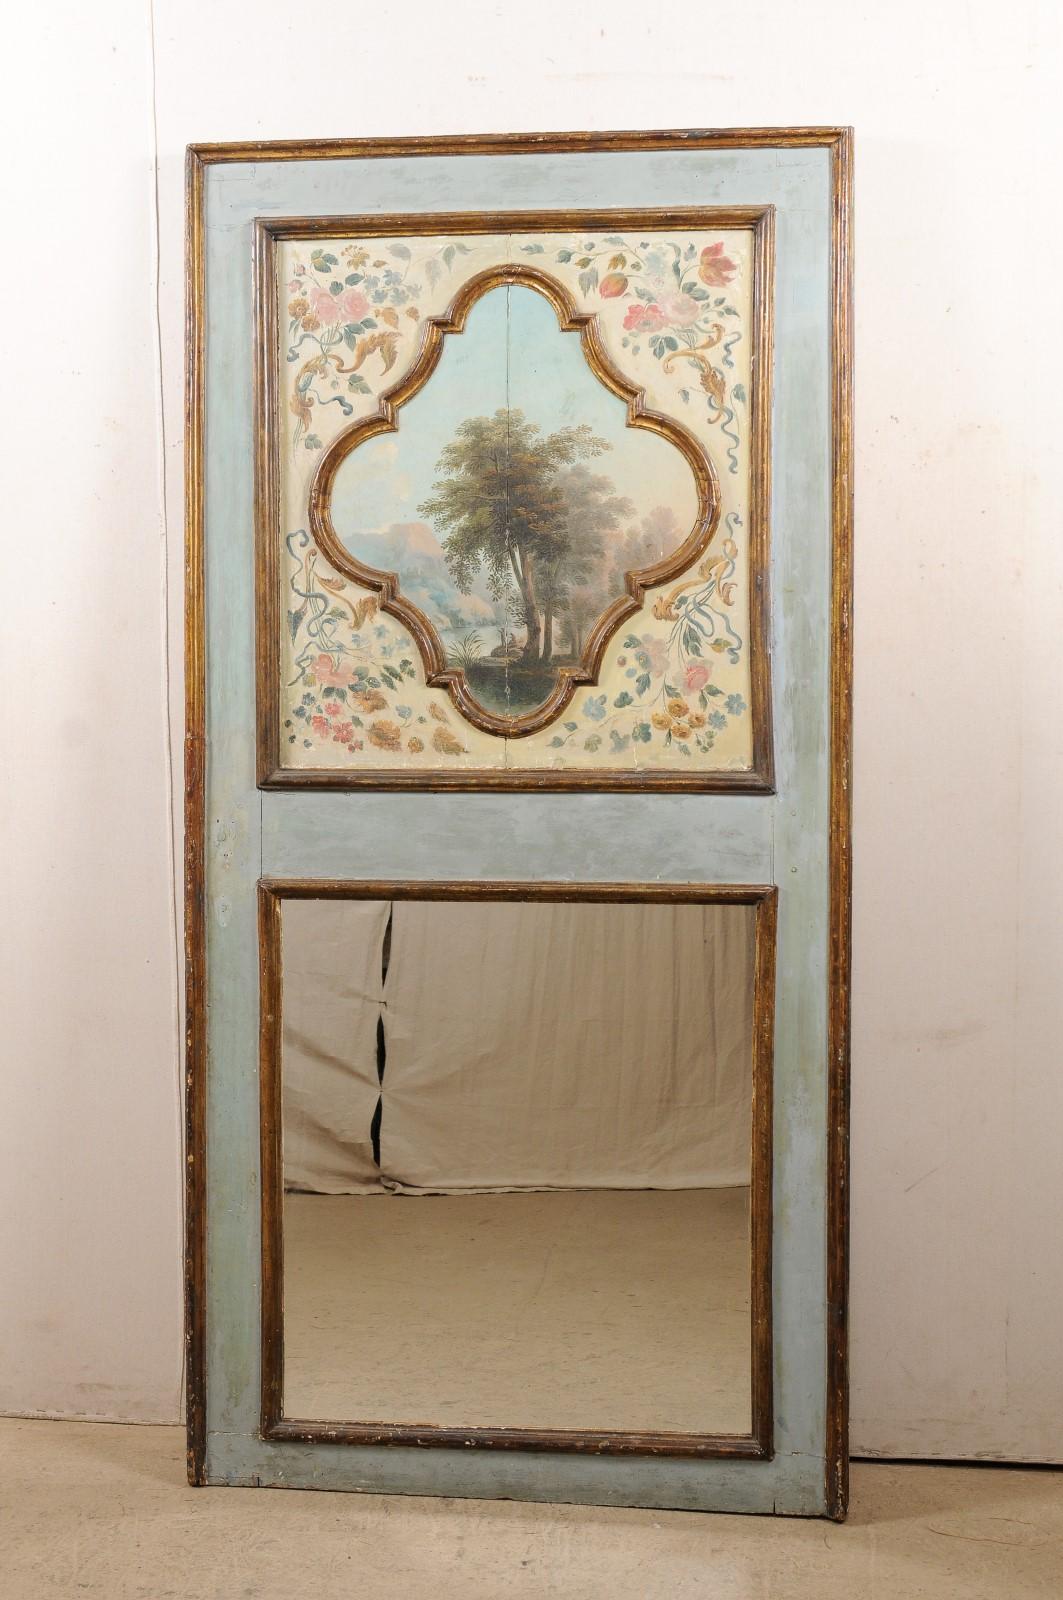 An Italian pier mirror with upper panel oil painting from the 19th century. This antique wall decoration from Italy features an artisan painted serene landscape oil painting, artfully framed within an upper panel, and having and abundant display of